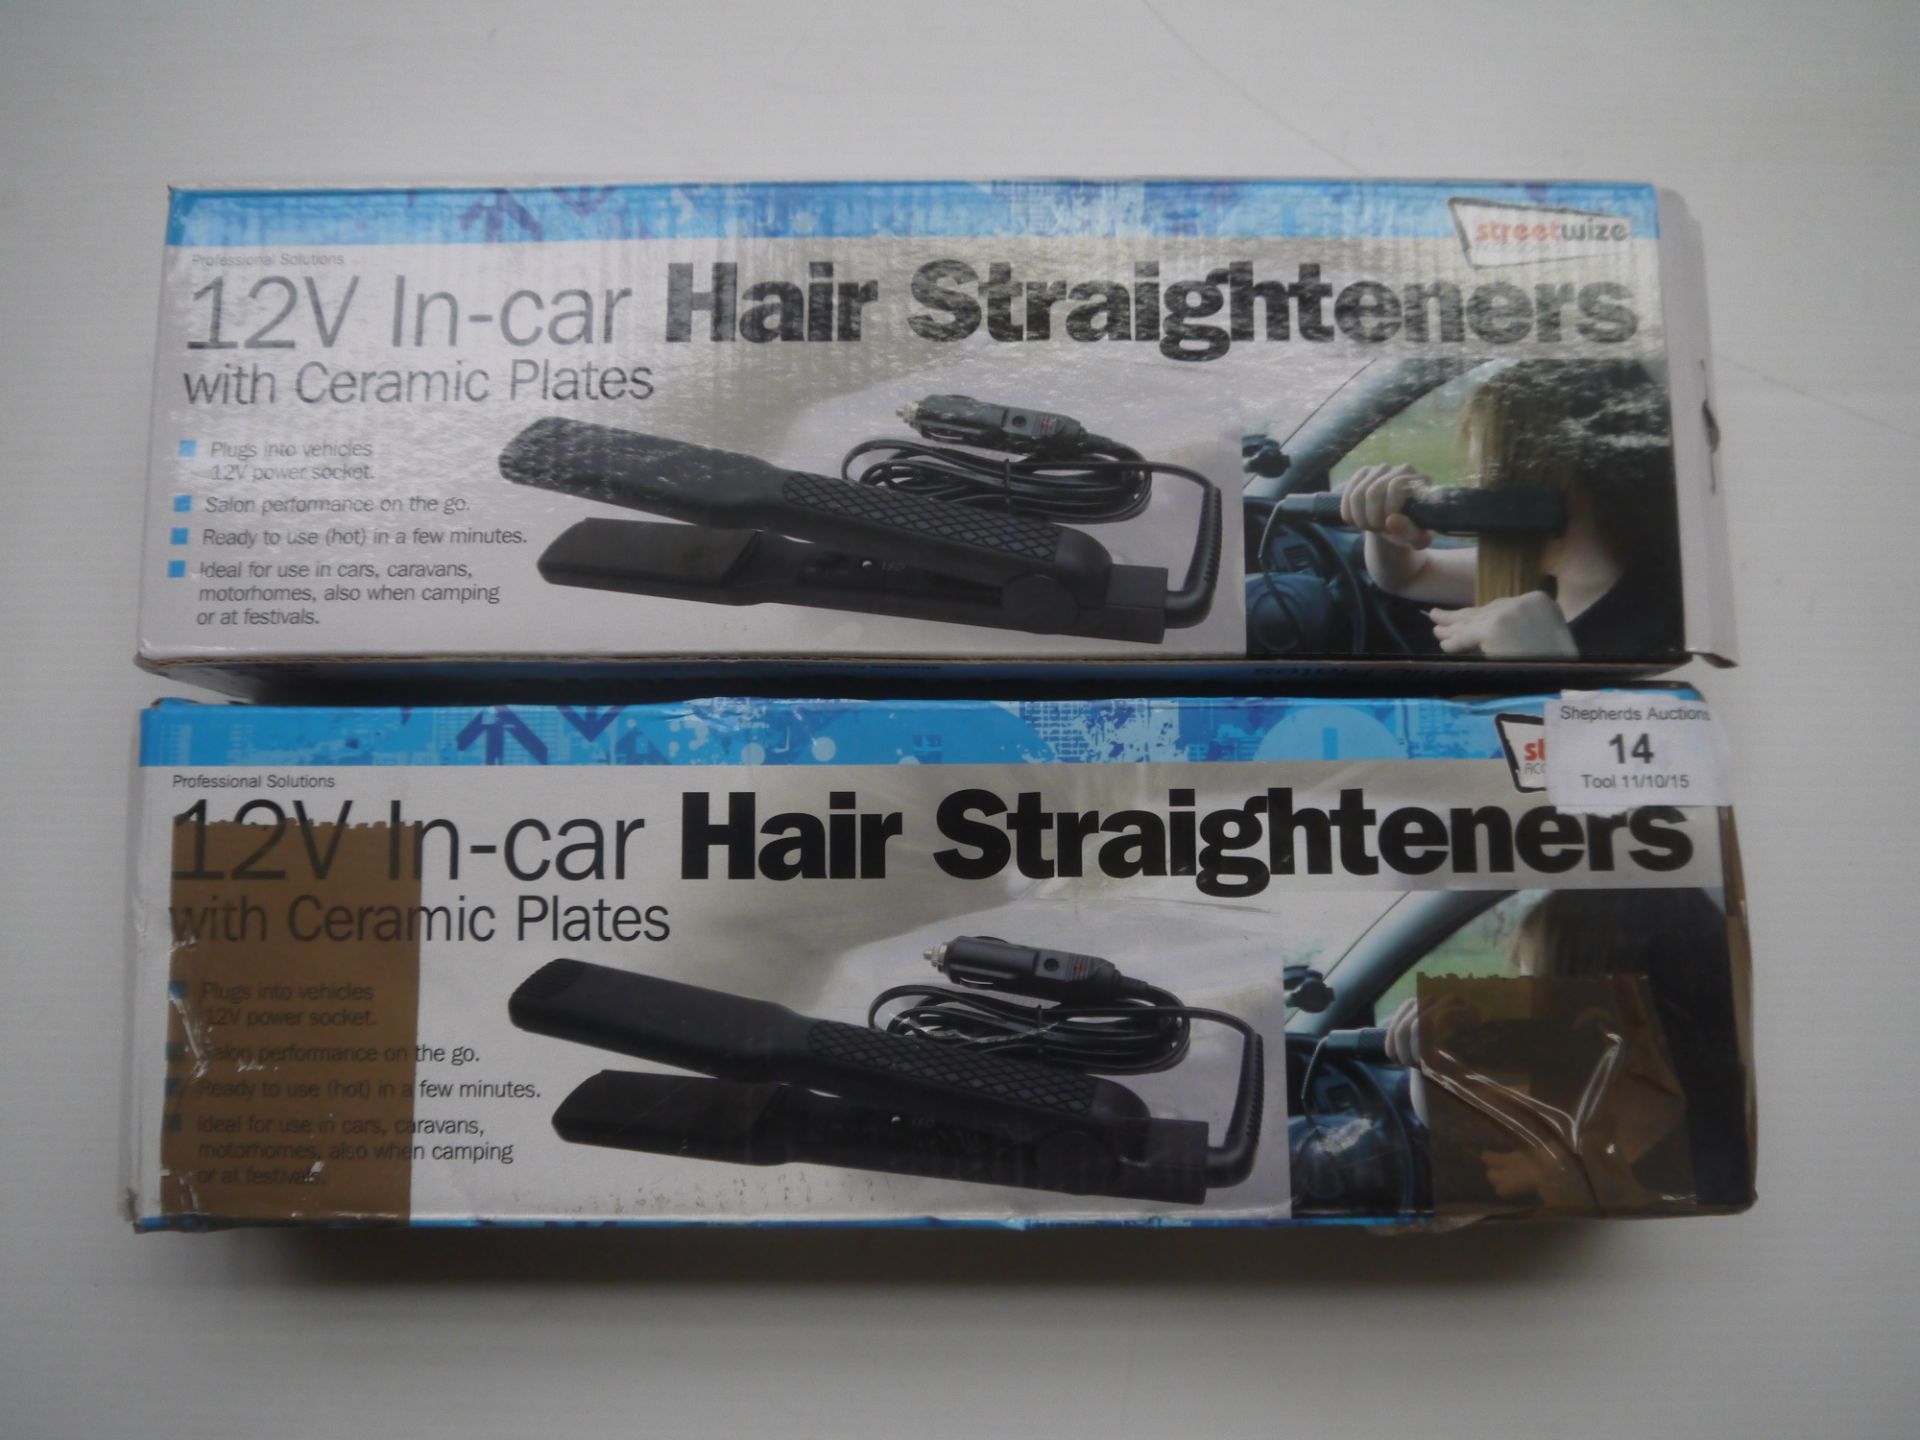 2x 12V In Car Hair Straighteners. Boxed.